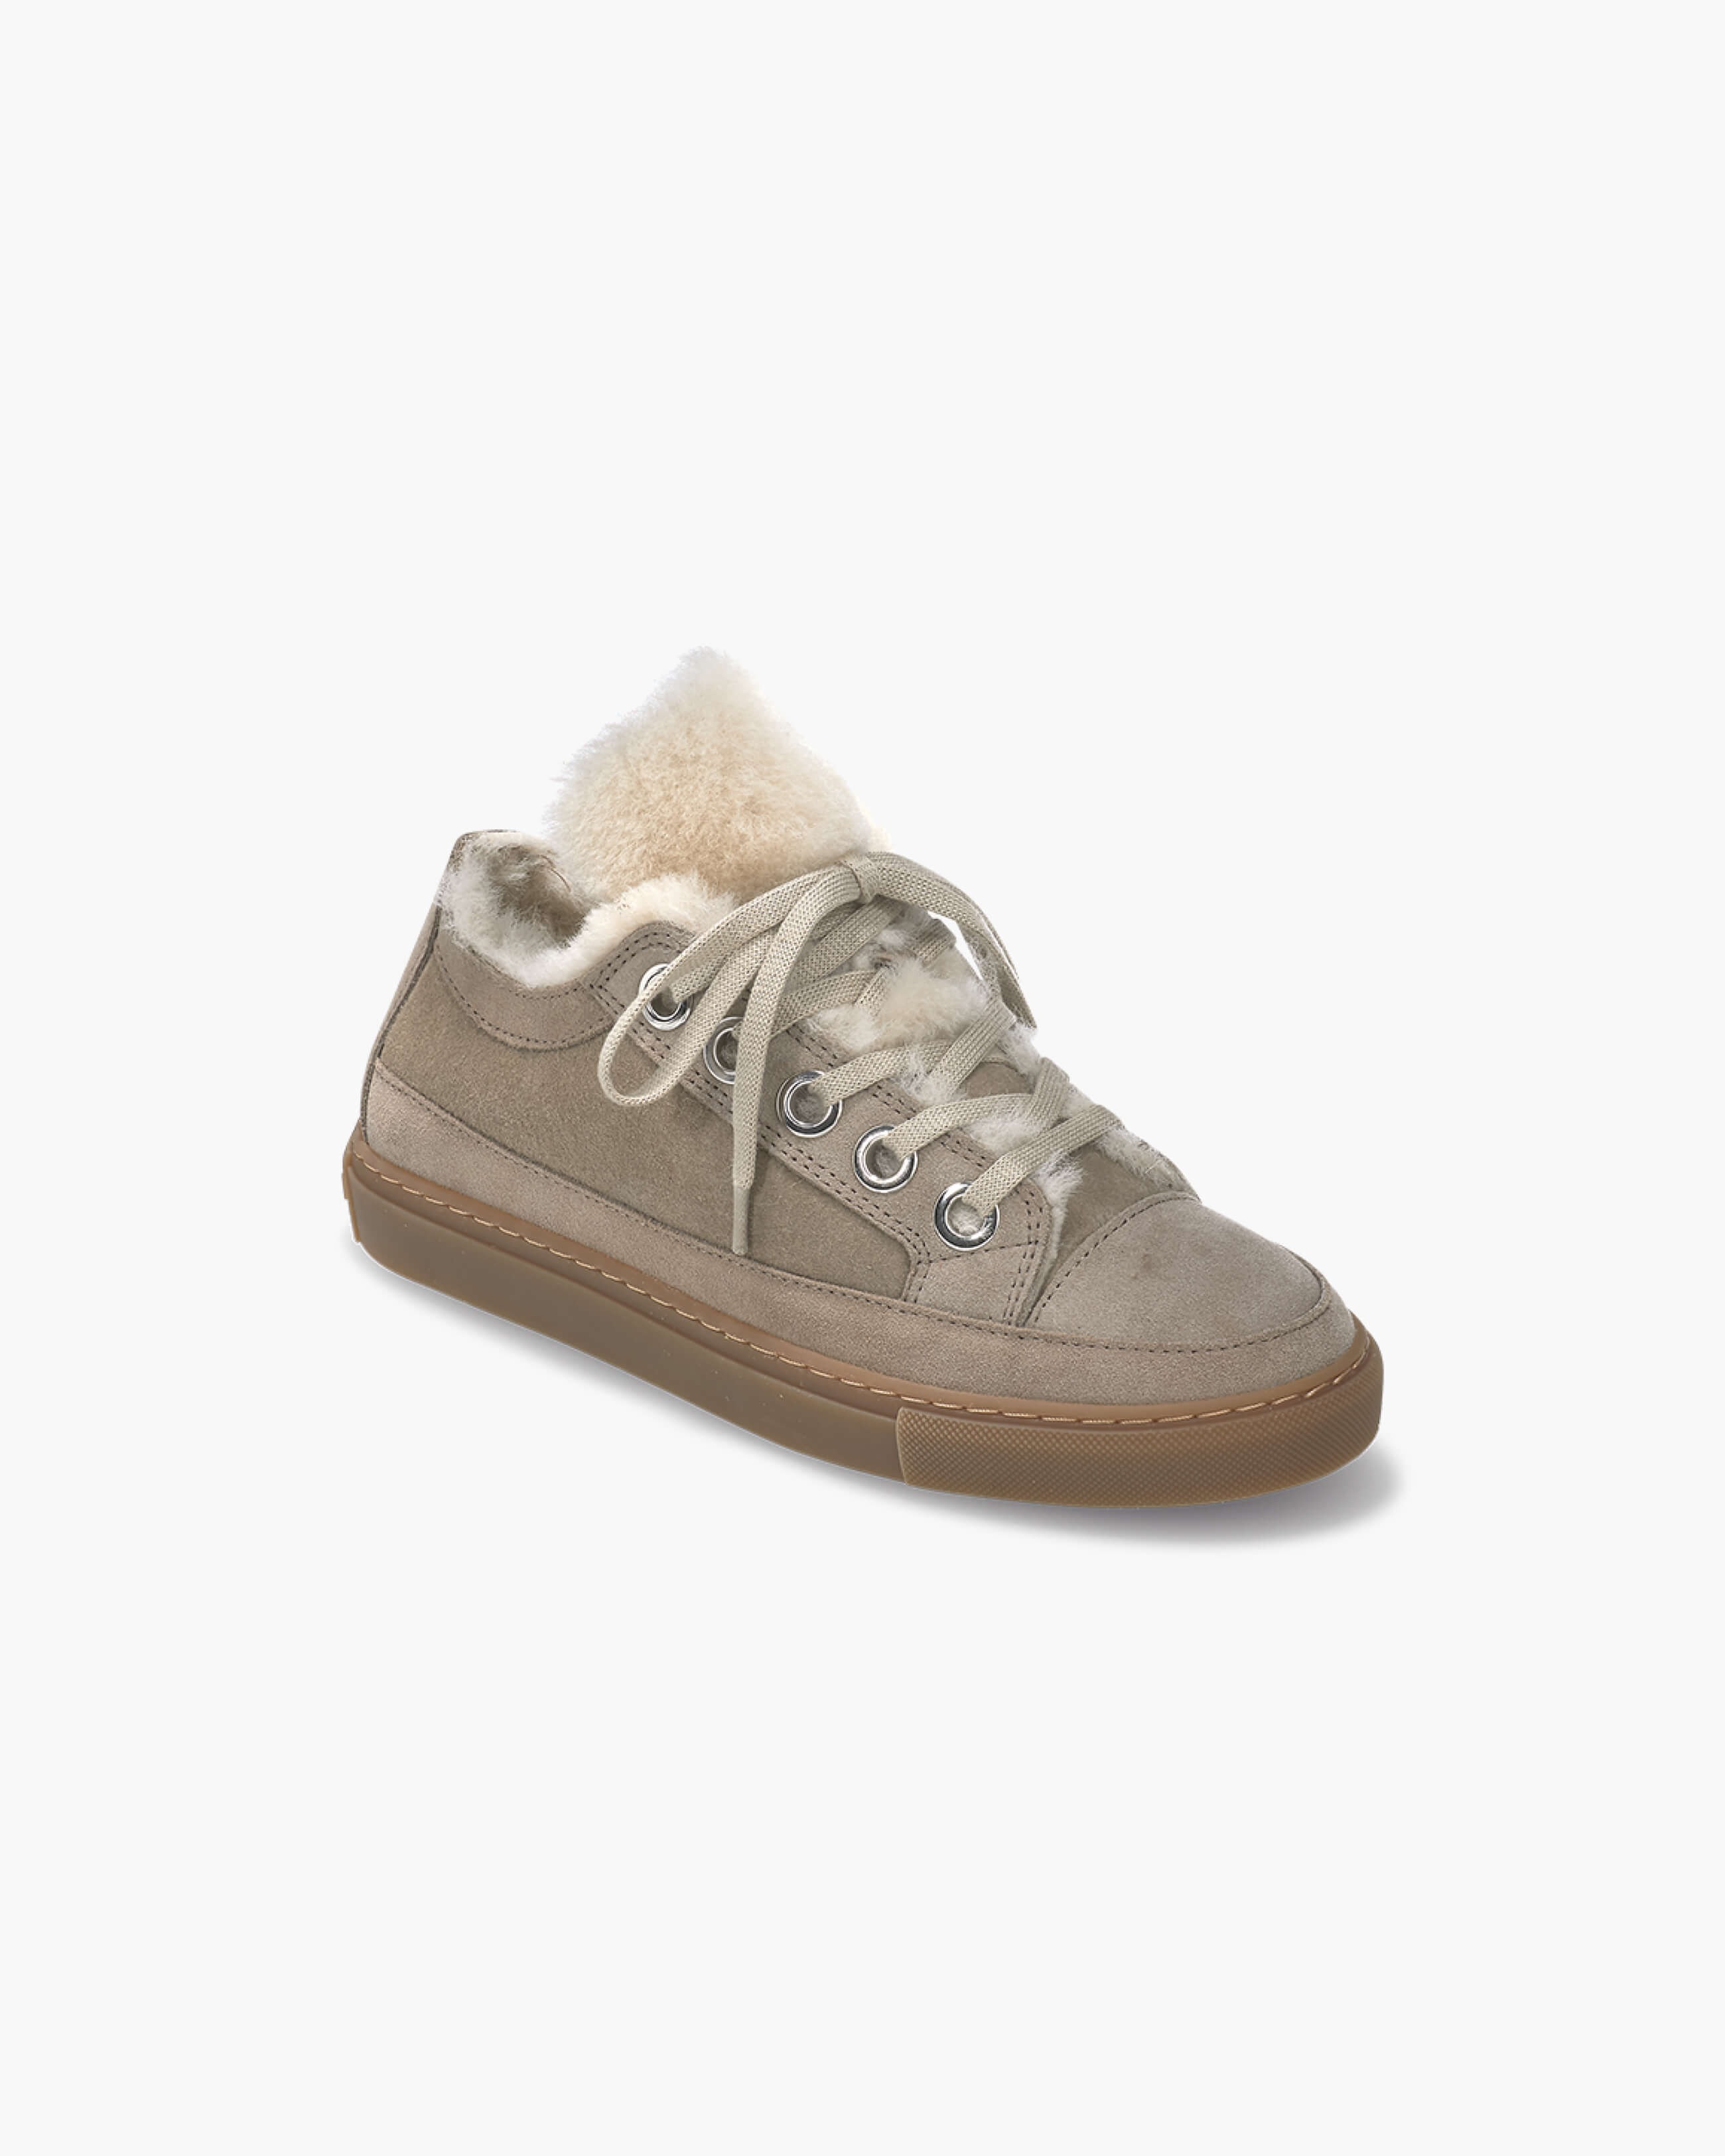 Lace Up Shearling Sneaker